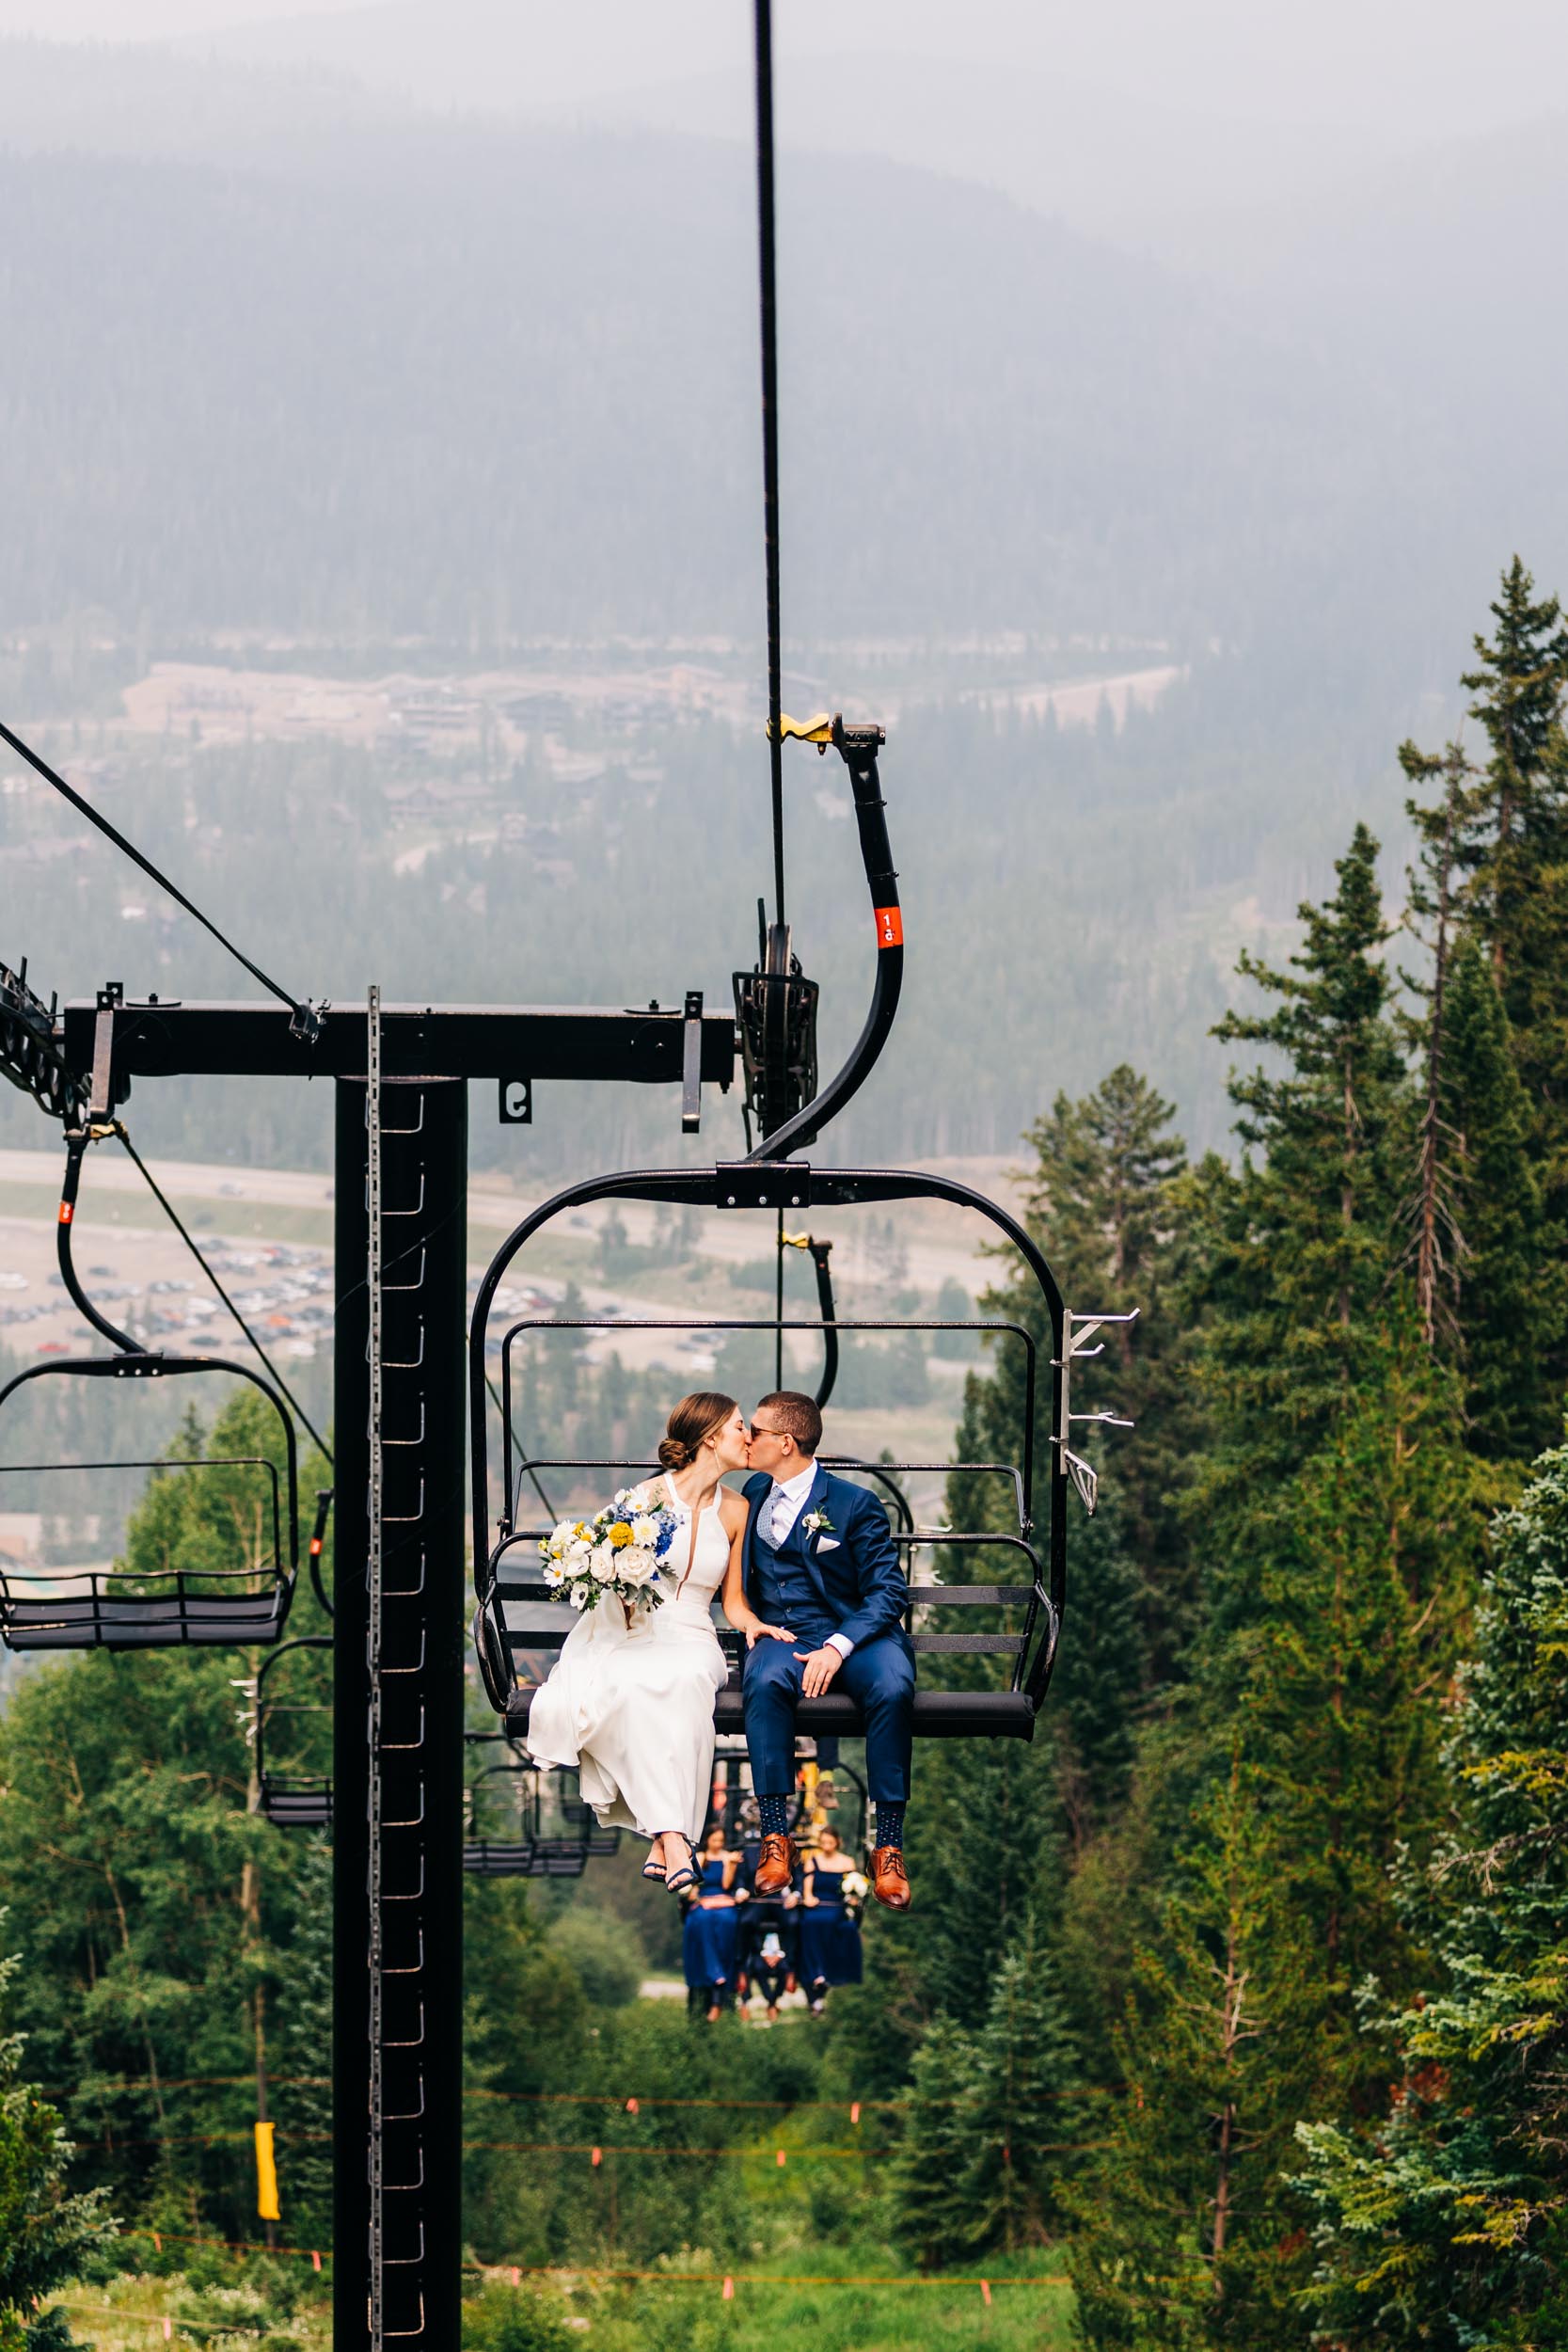 Lunch Rock wedding photo of bride and groom riding ski lift to ceremony